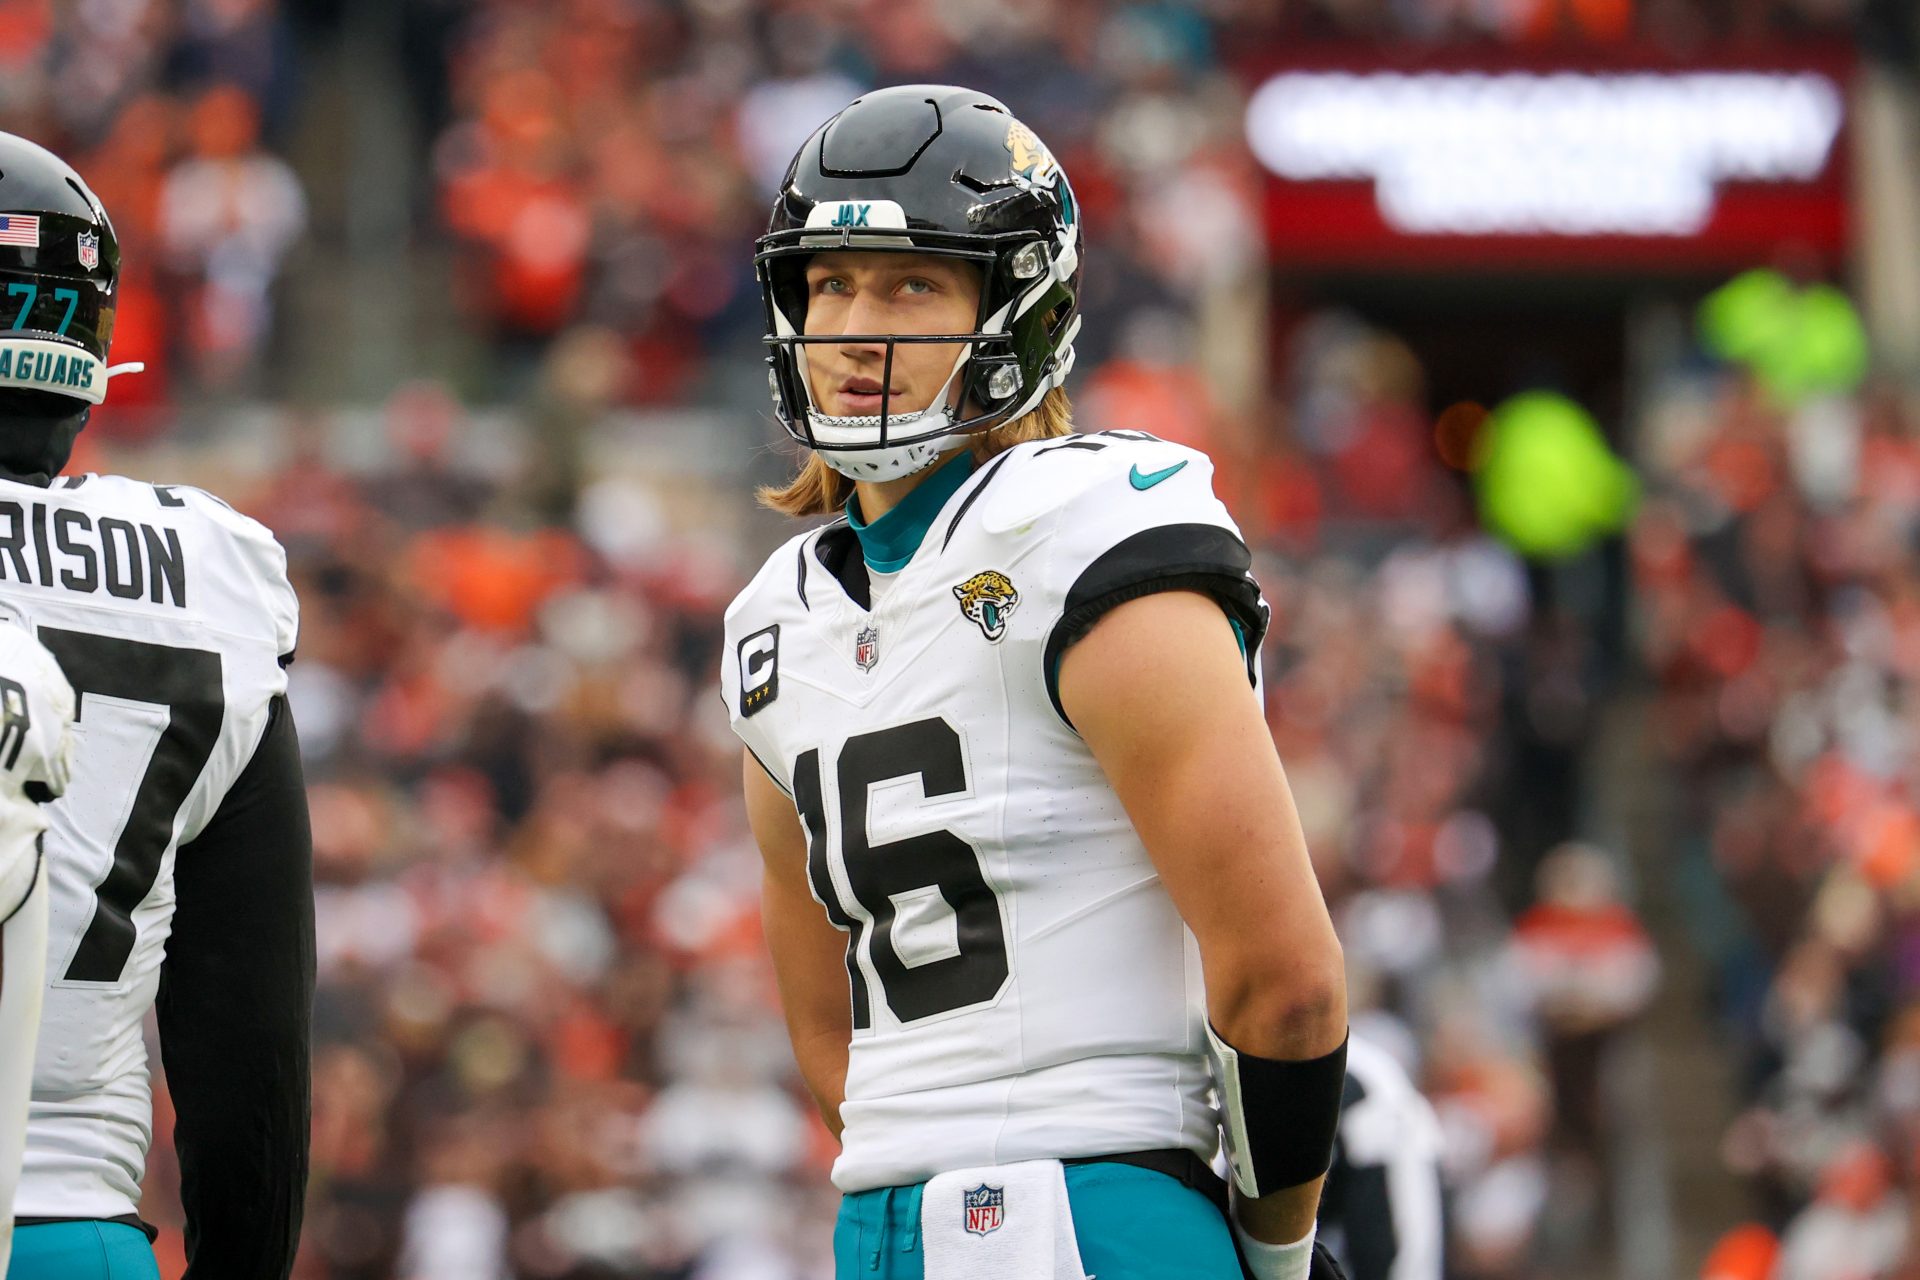 Jaguars' sad collapse and Belichick’s last game? NFL Week 18 disappointments